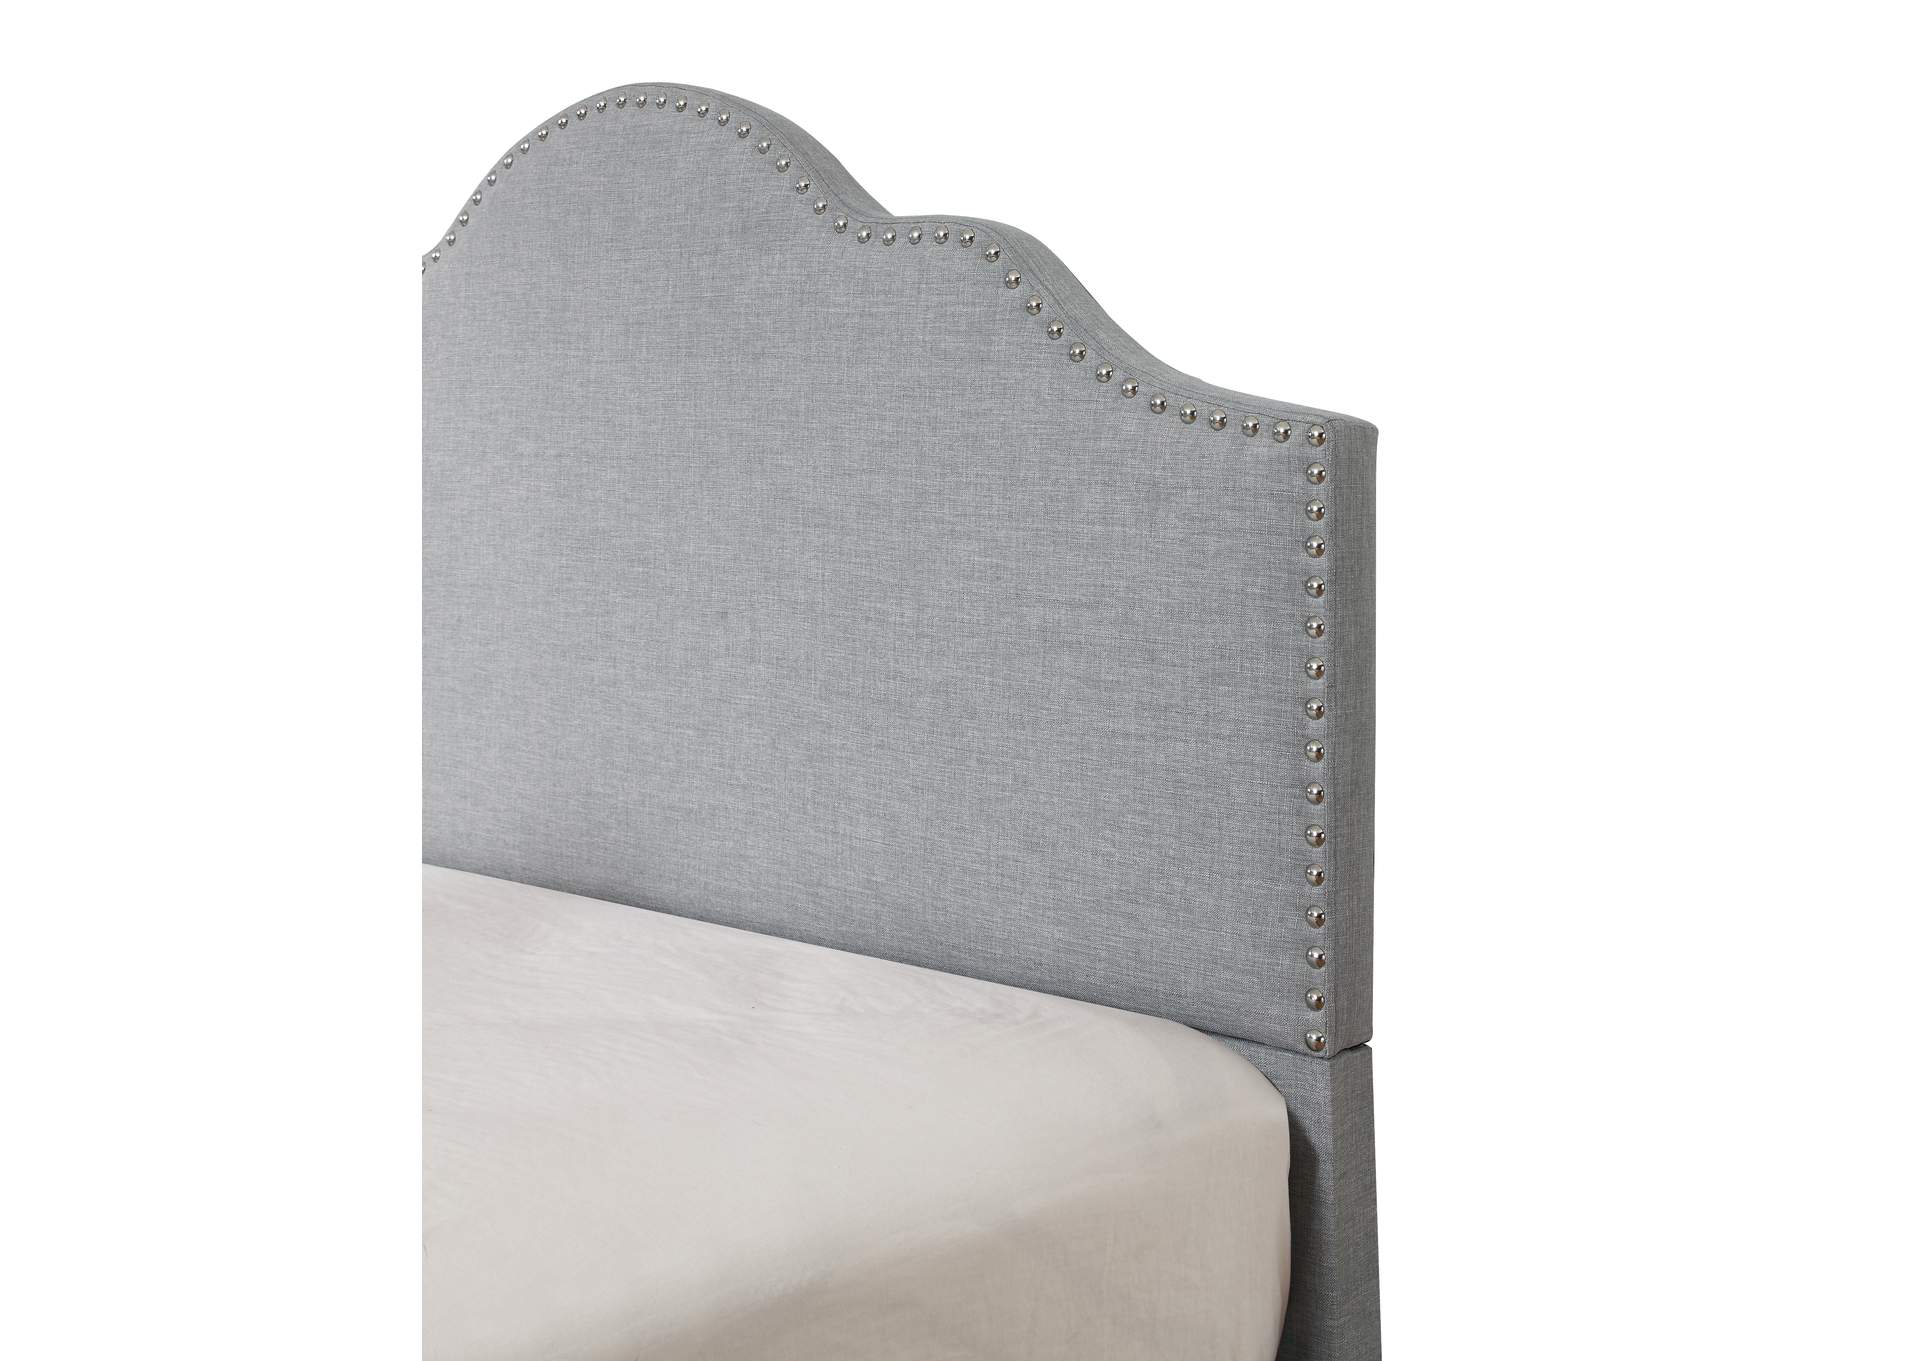 Madison King Upholstered Bed,Emerald Home Furnishings